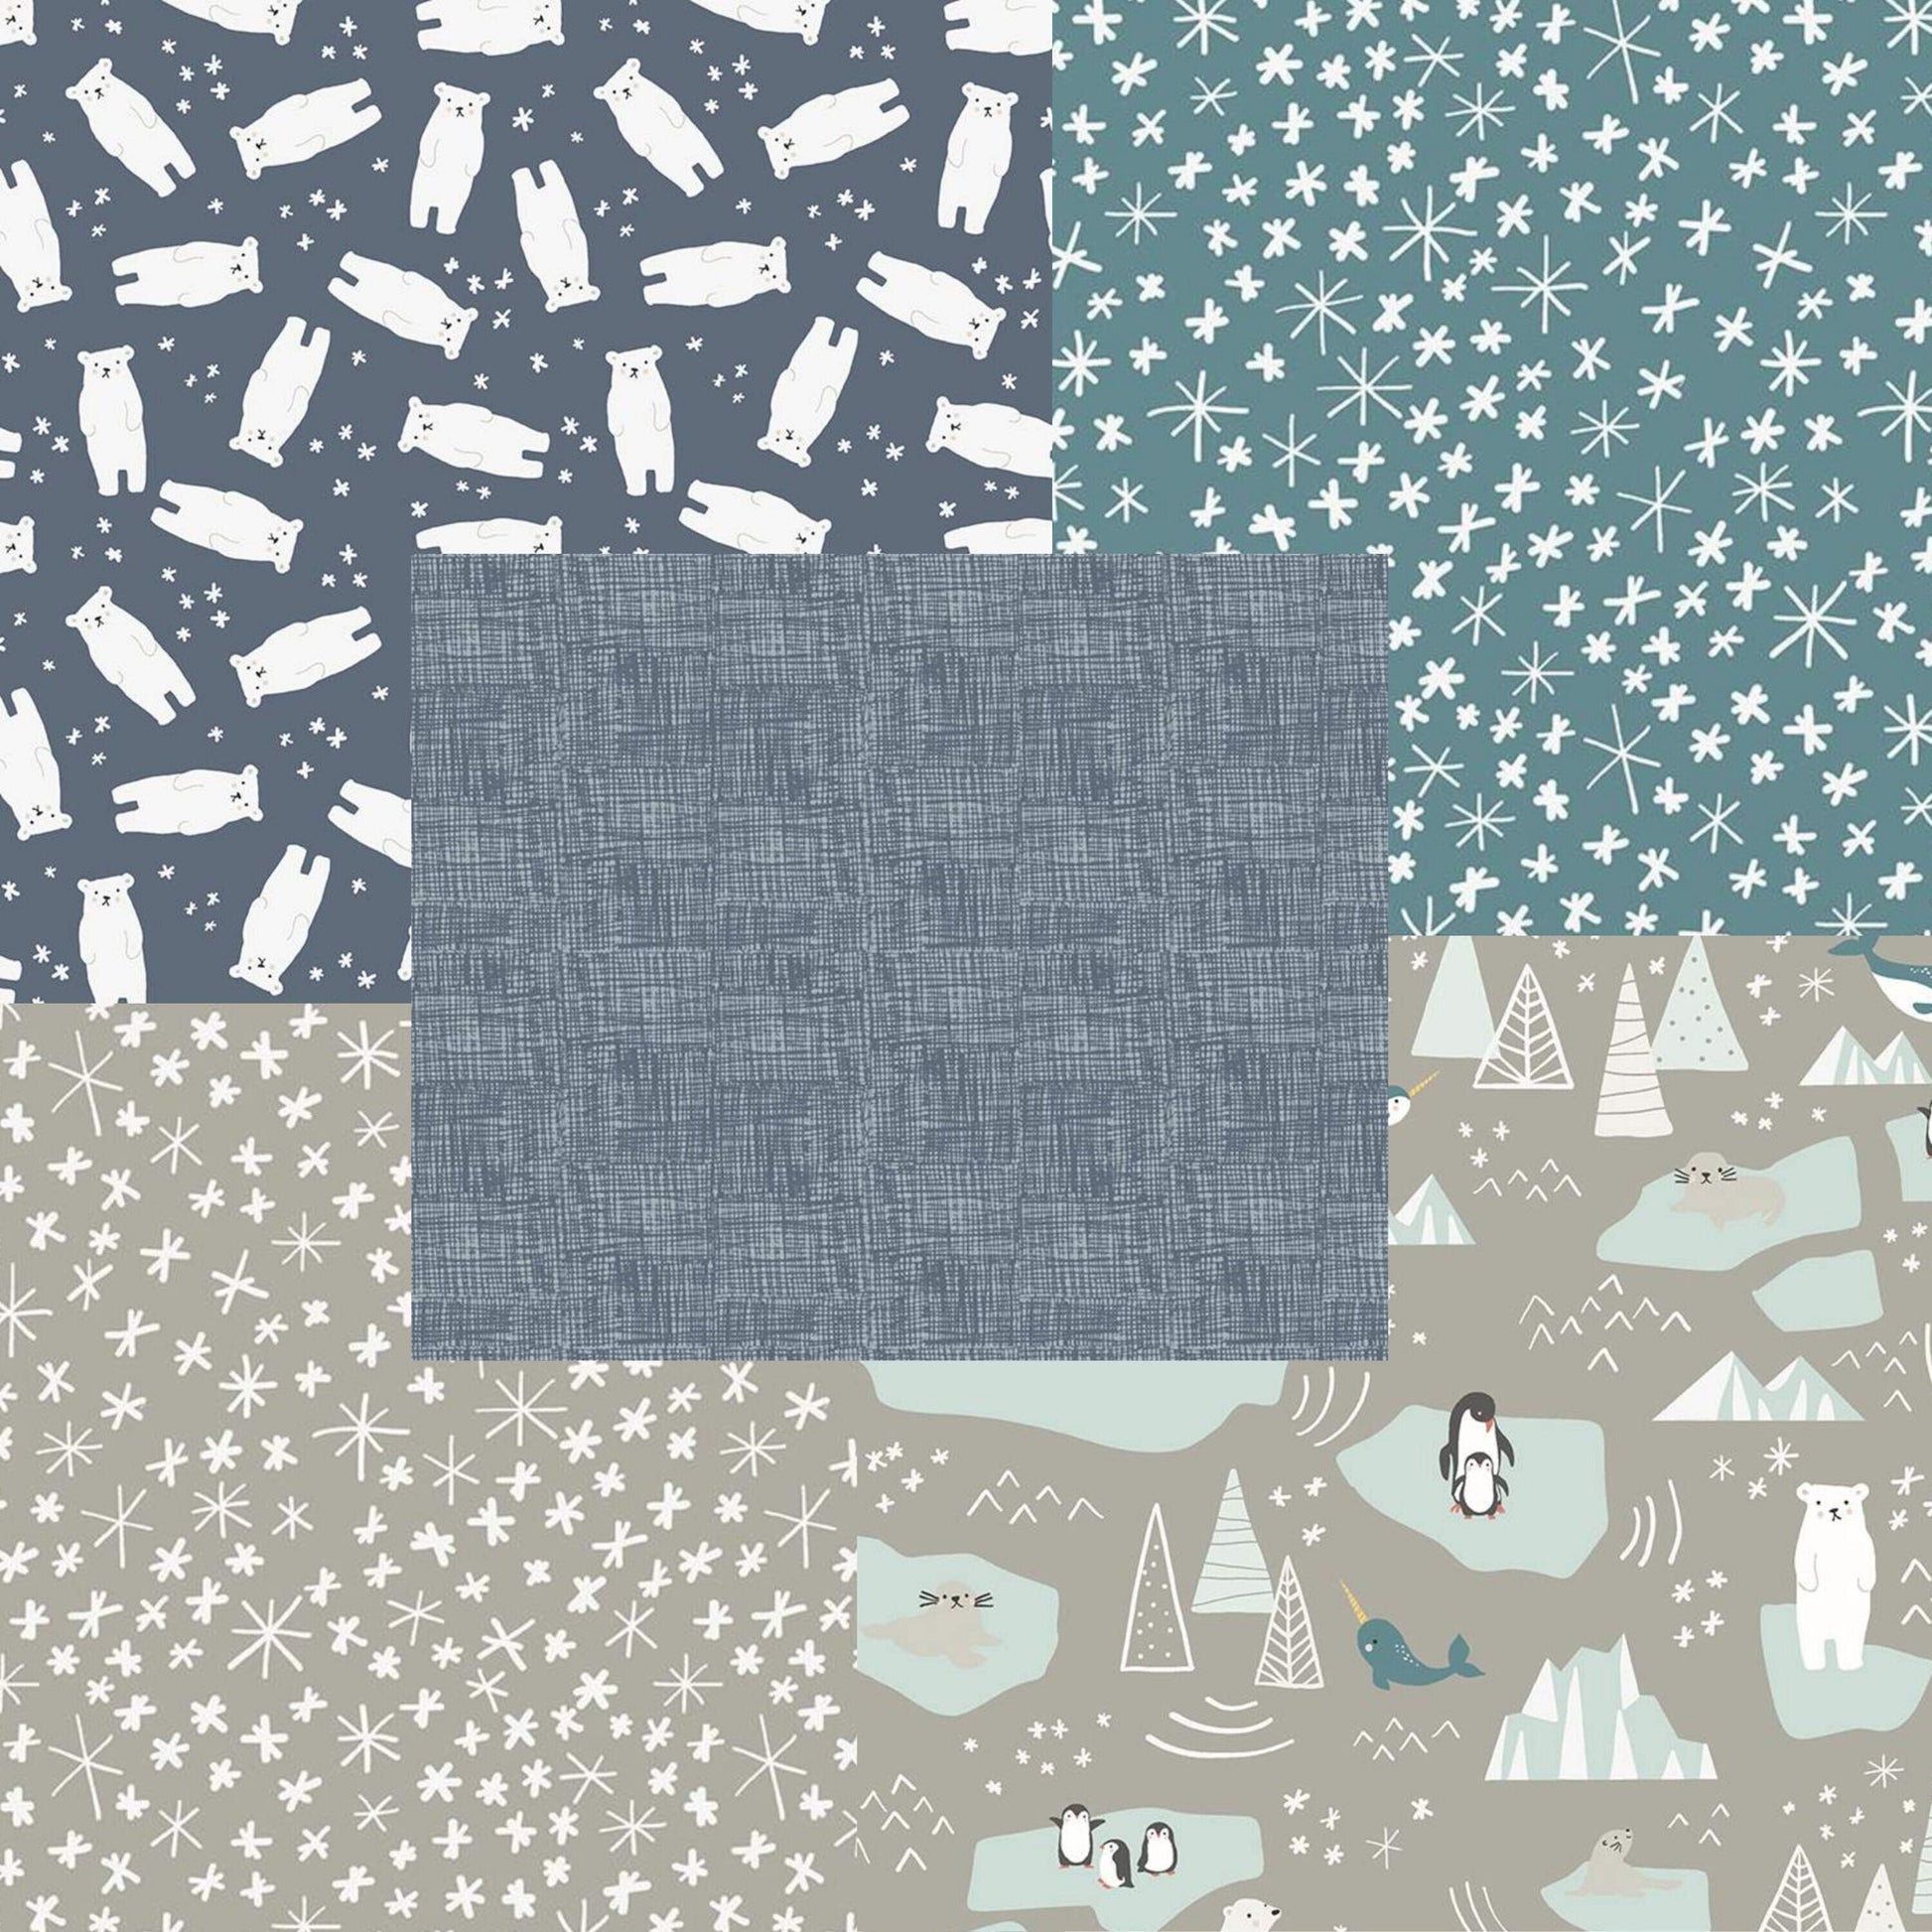 LAMINATED cotton fabric - Nice Ice Baby on gray (sold continuous by the half yard) Food Safe Fabric, BPA free